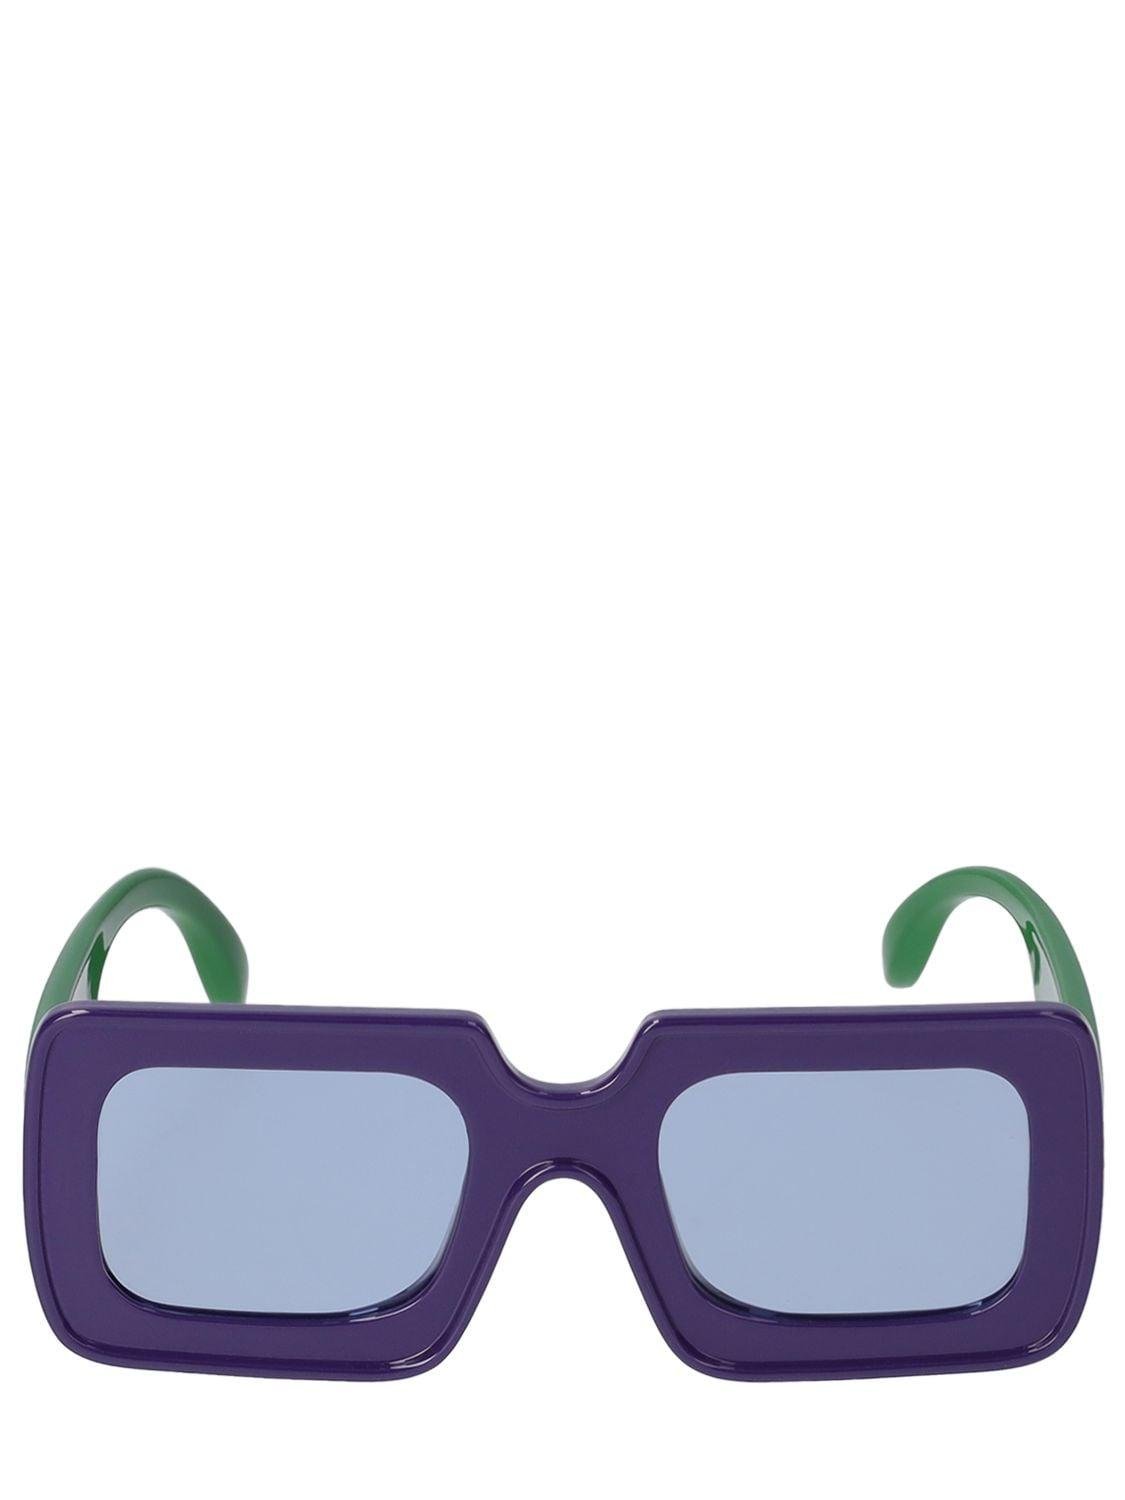 Logo Print Recycled Poly Sunglasses by THE ANIMALS OBSERVATORY